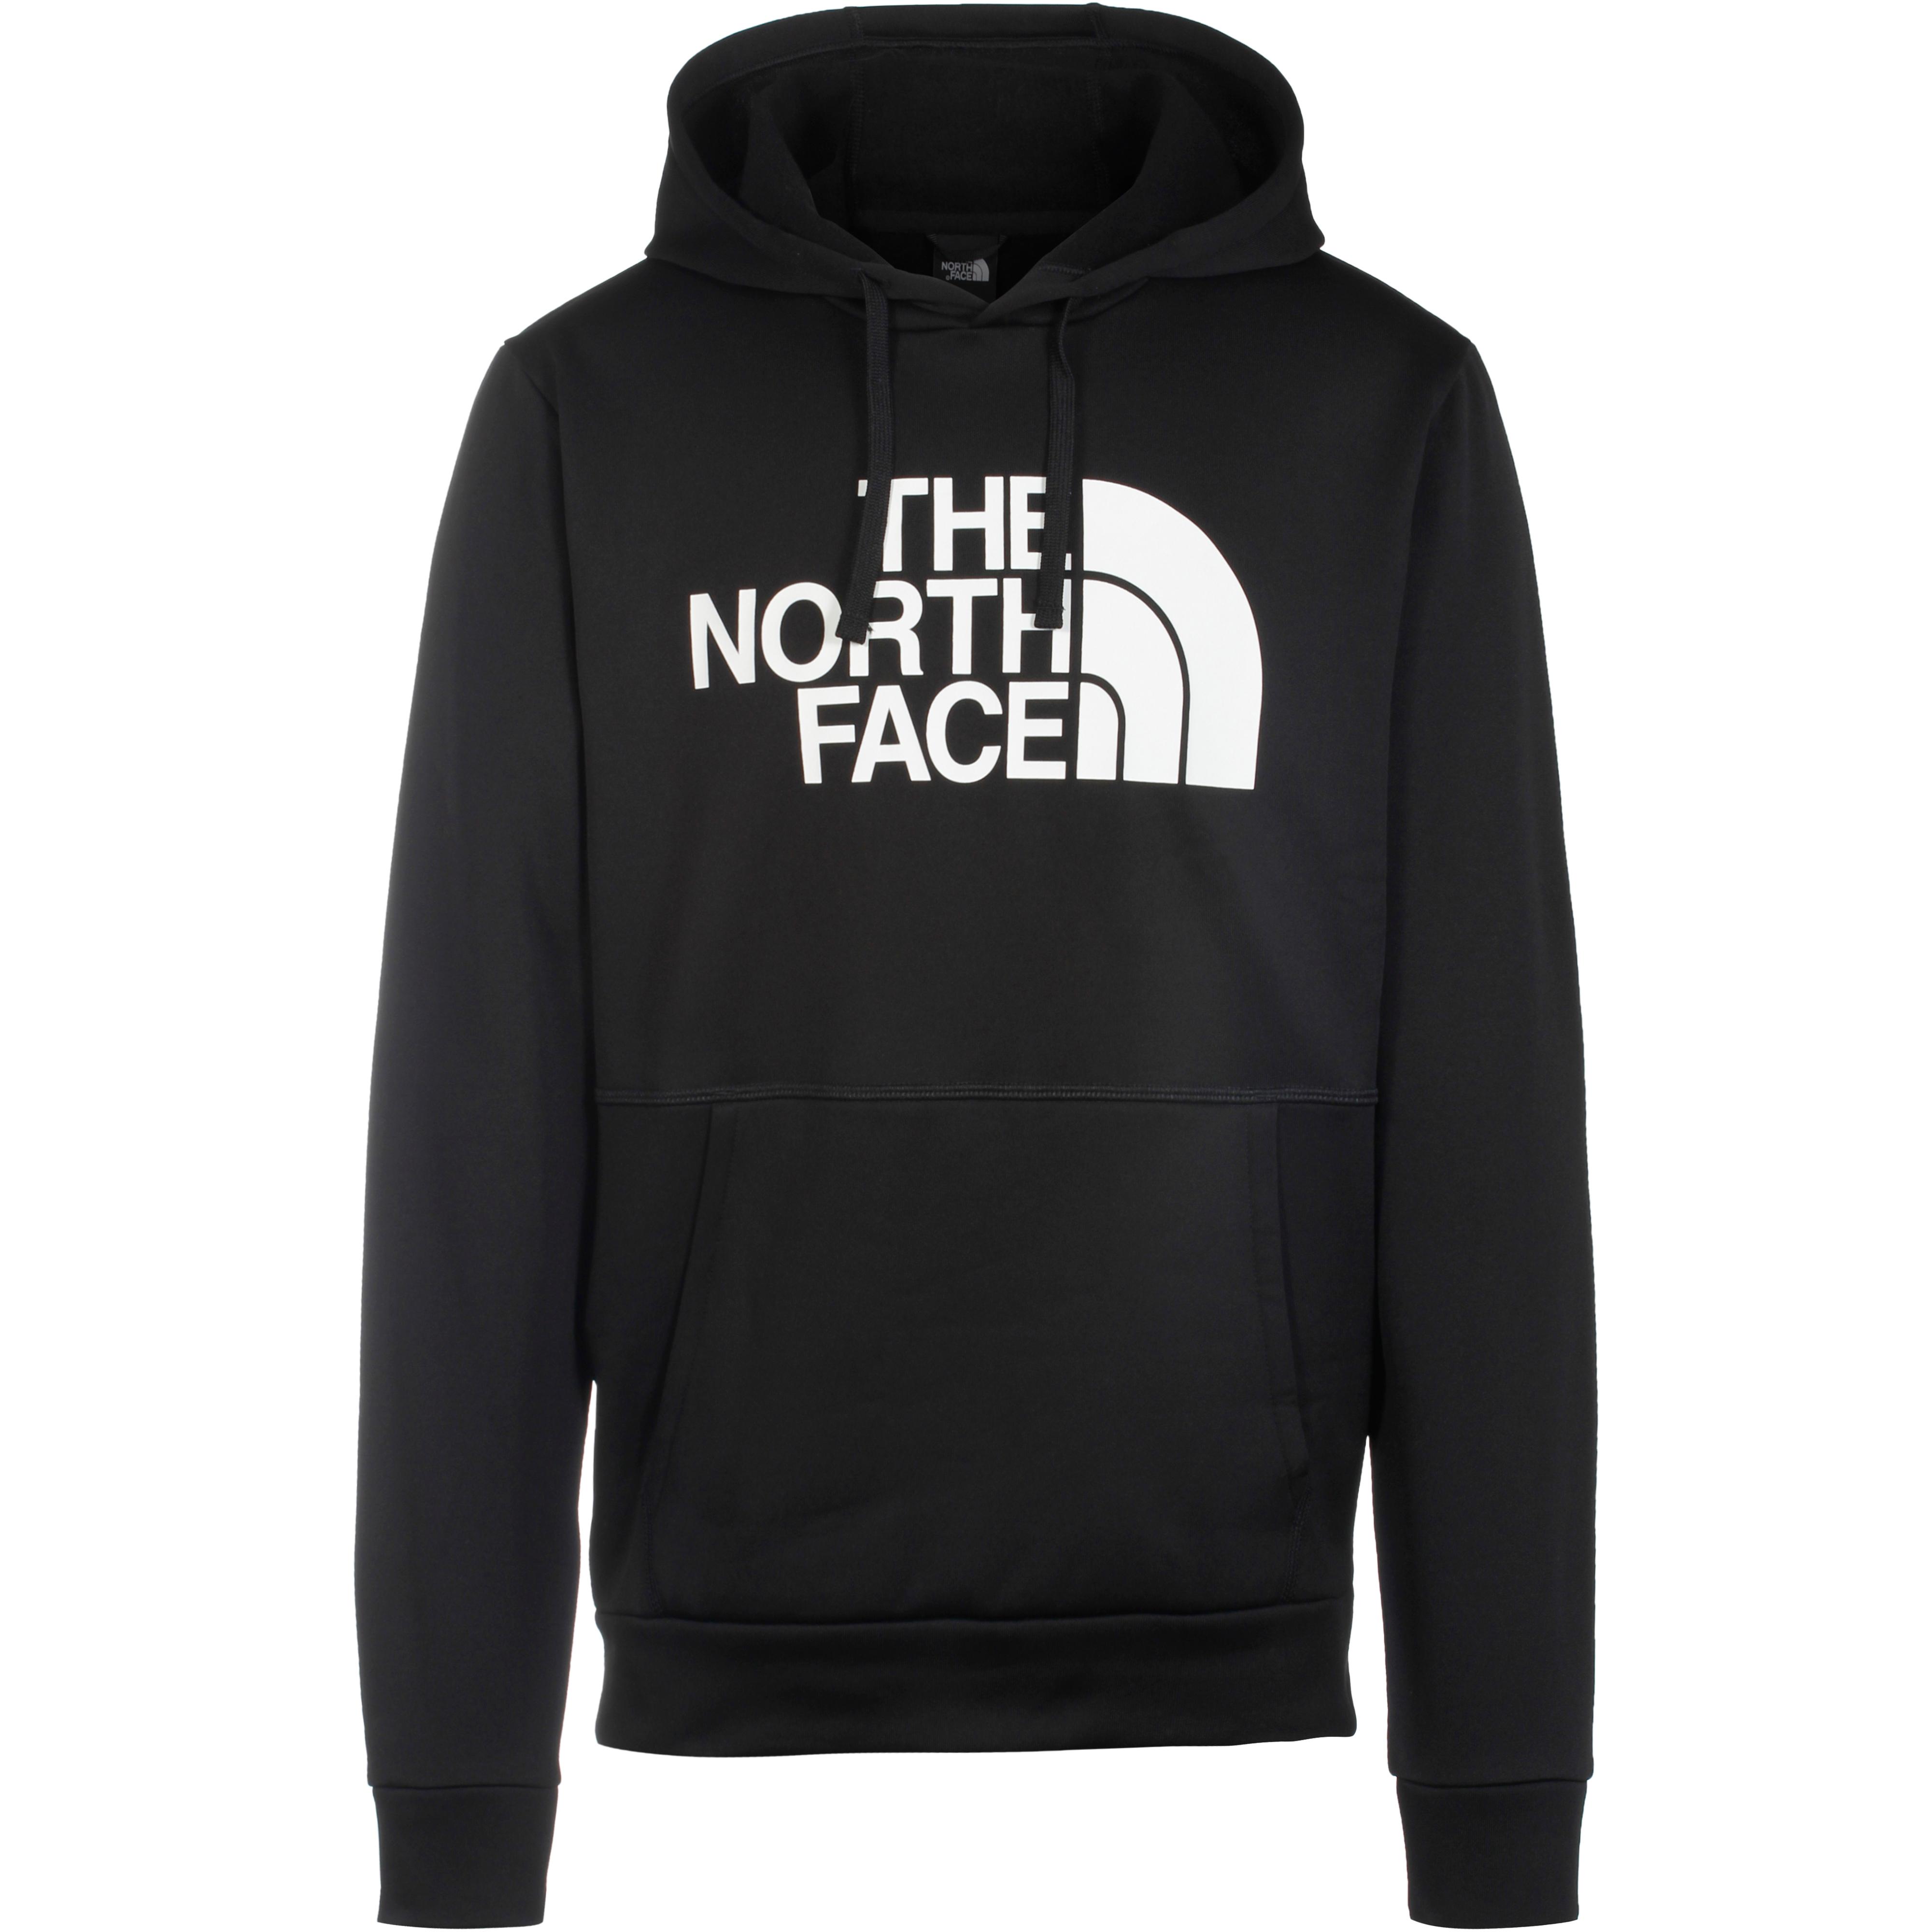 Image of The North Face EXPLORATION Hoodie Herren